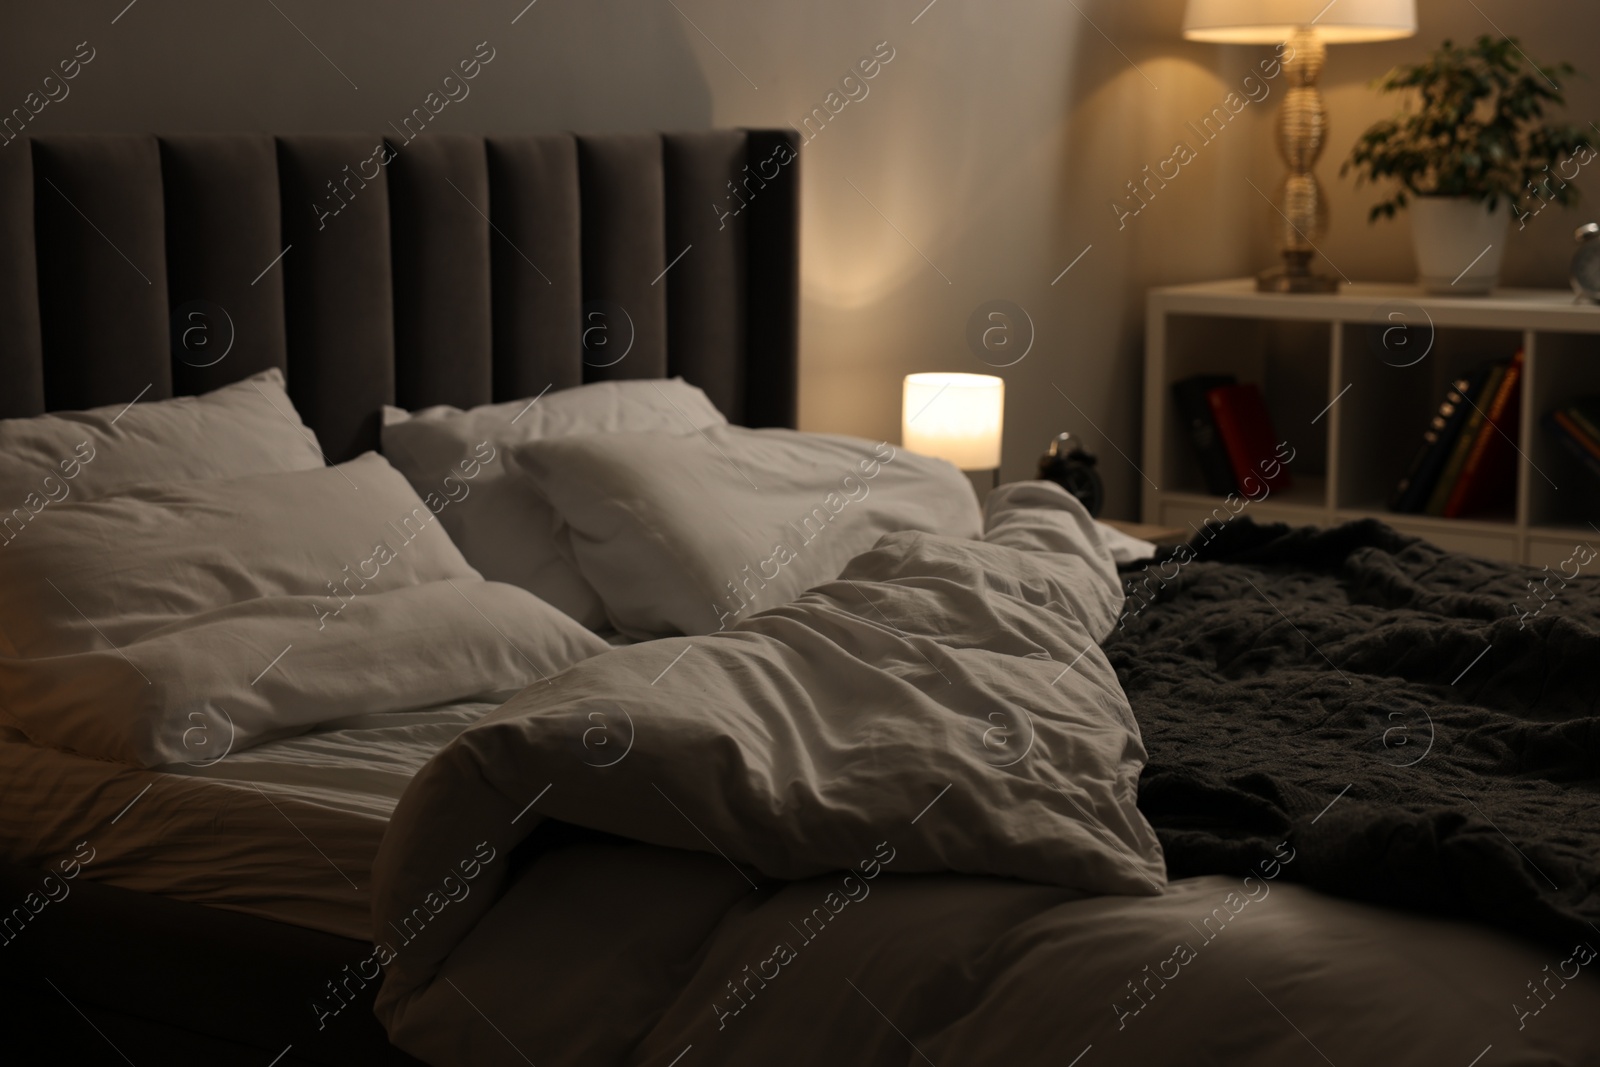 Photo of Soft bed, nightlight and cozy furniture indoors